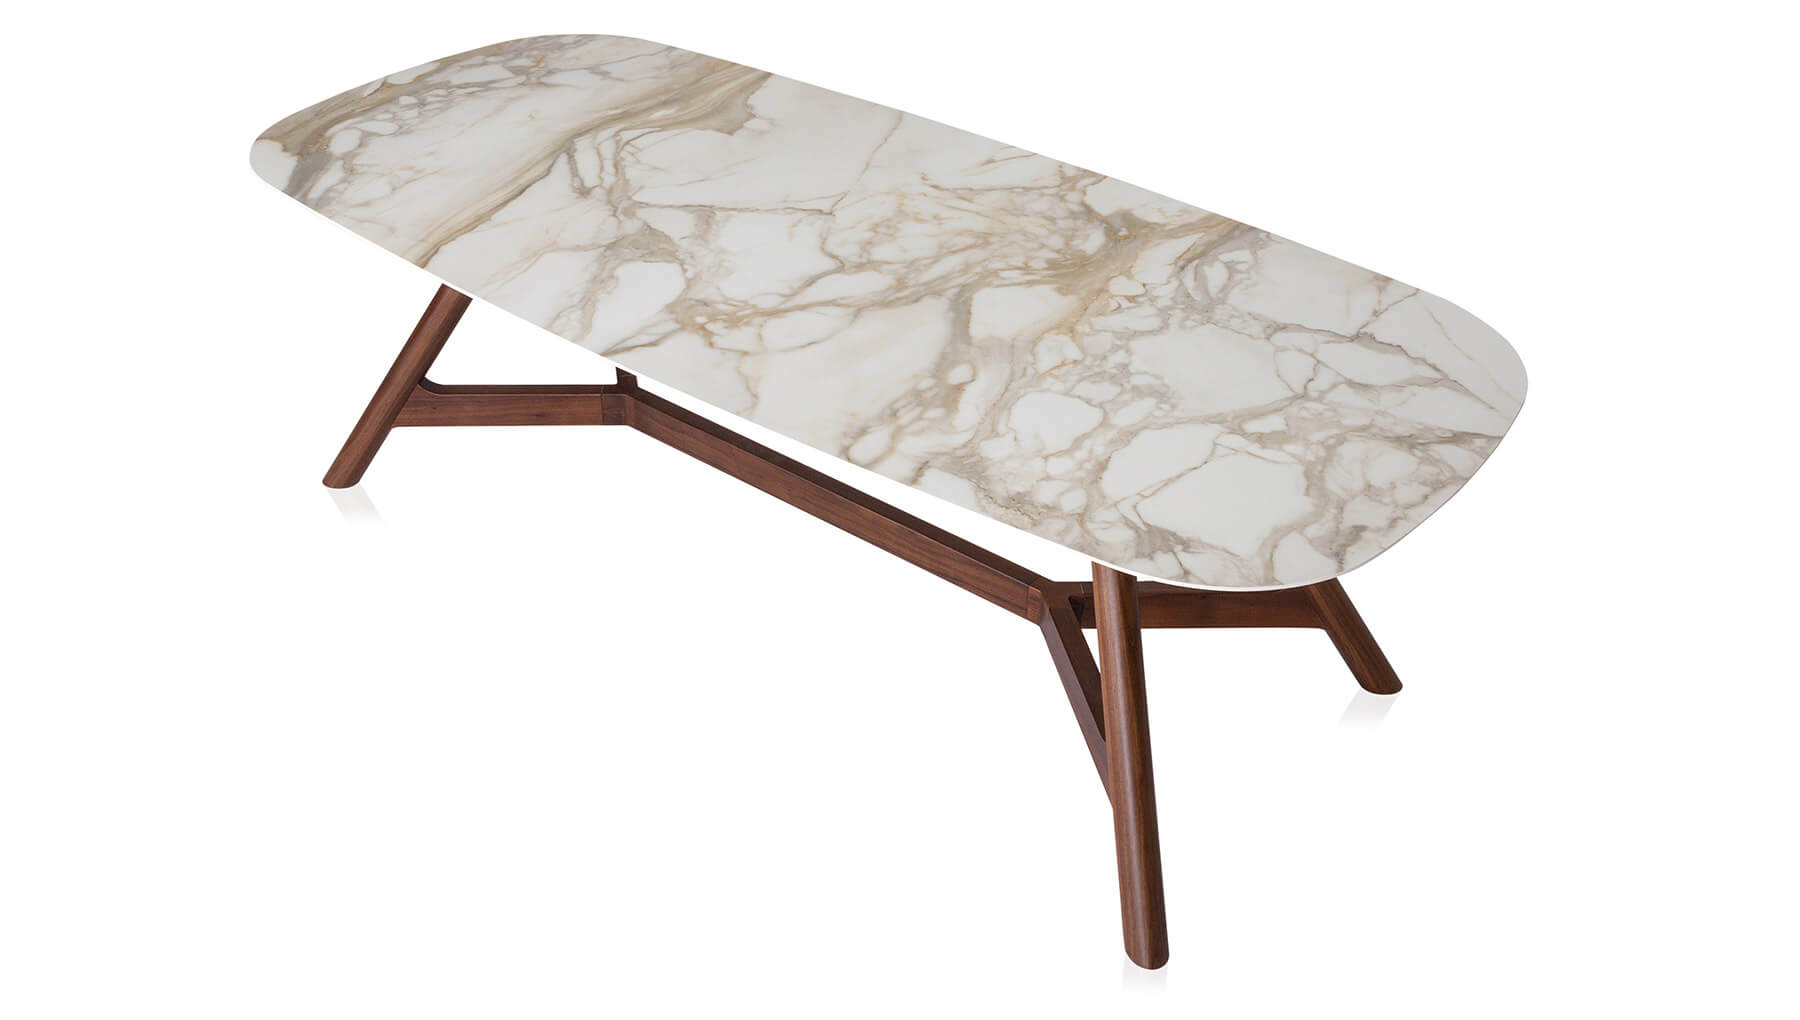 Kahal c cer 001 dining table with ceramic on top